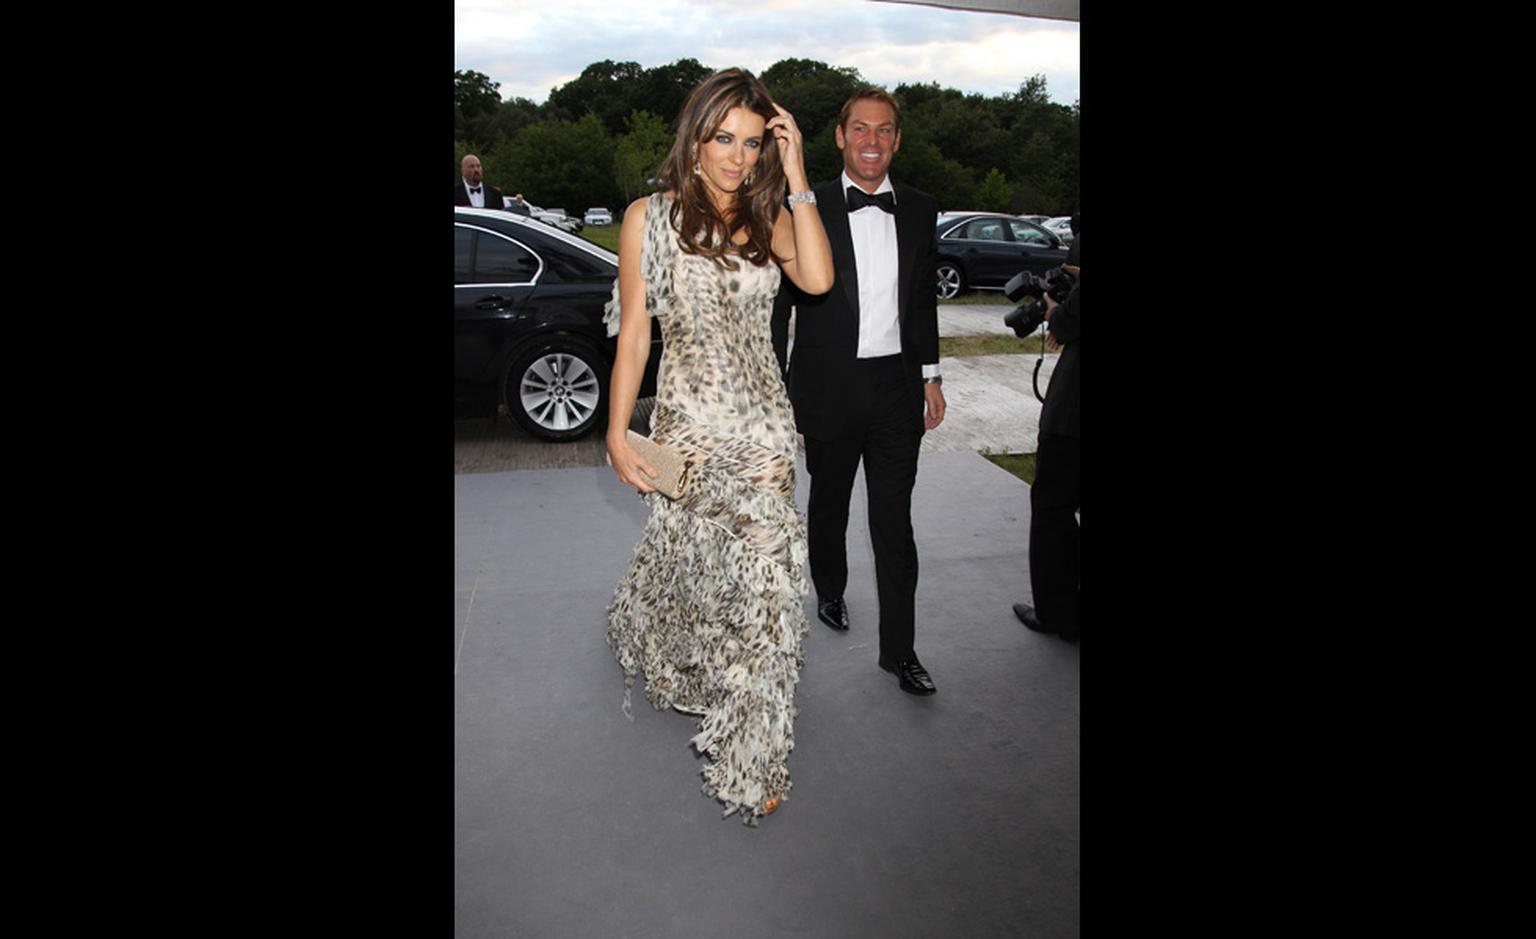 Elizabeth Hurley makes a grand entrance in Chopard diamond earrings and bracelet and a Cavalli gown with beau Shane Warne a discreet few steps behind.